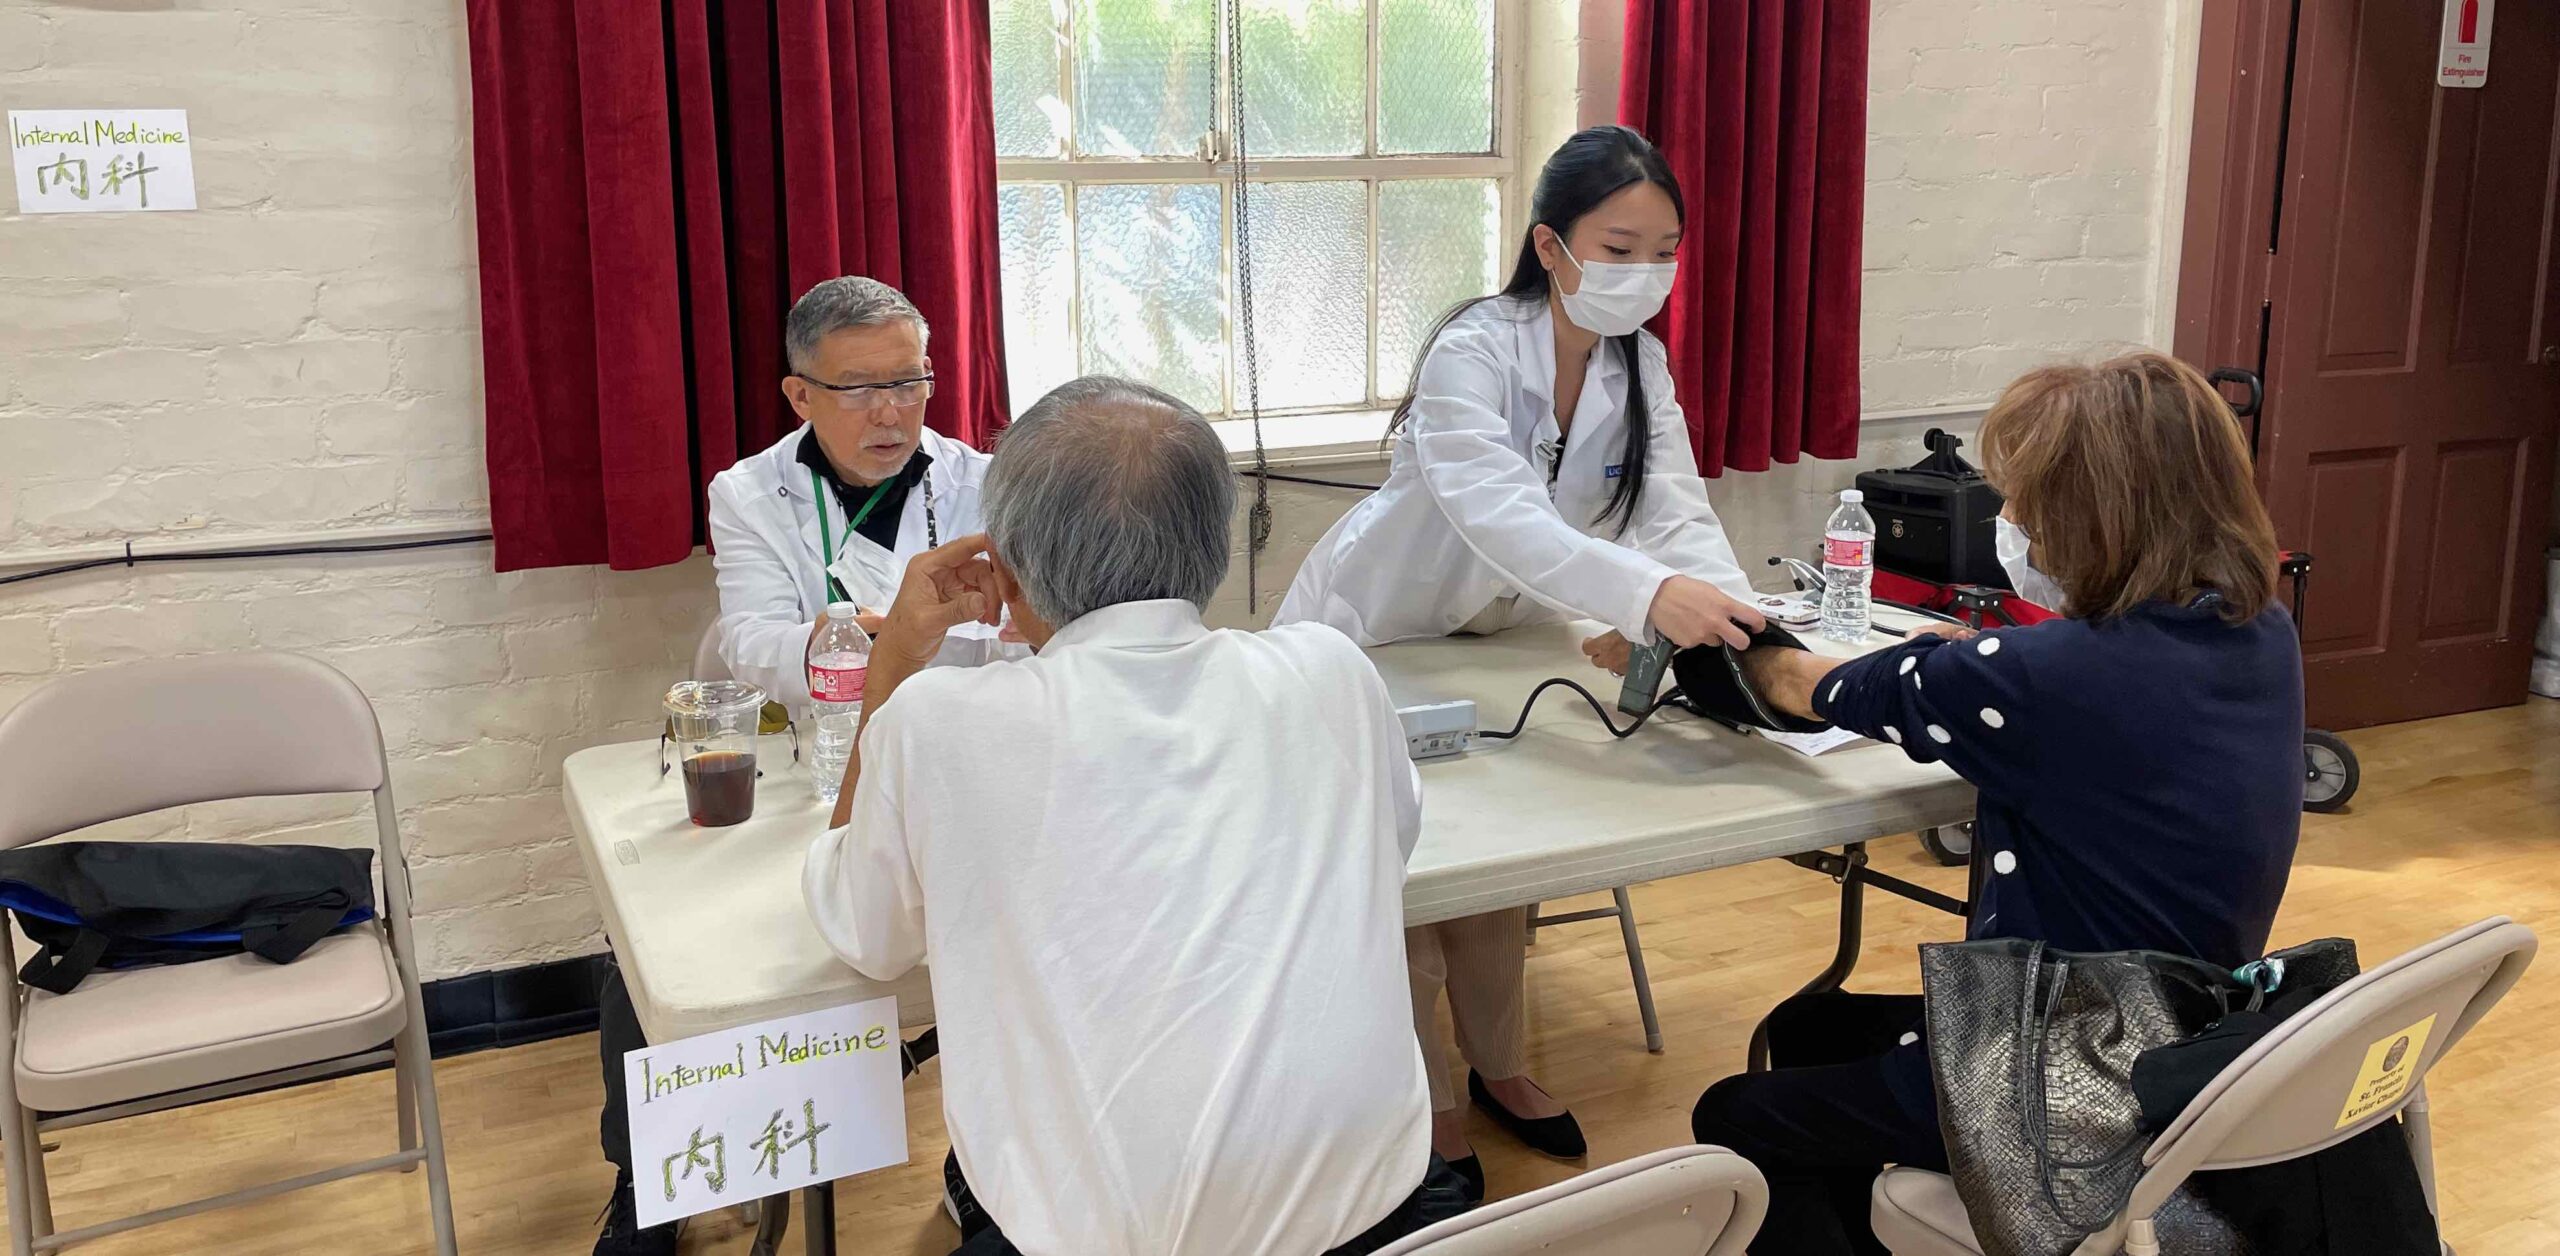 Dr. Matsumoto and resident Dr. Matsuno serving Nikkei patients at the health fair